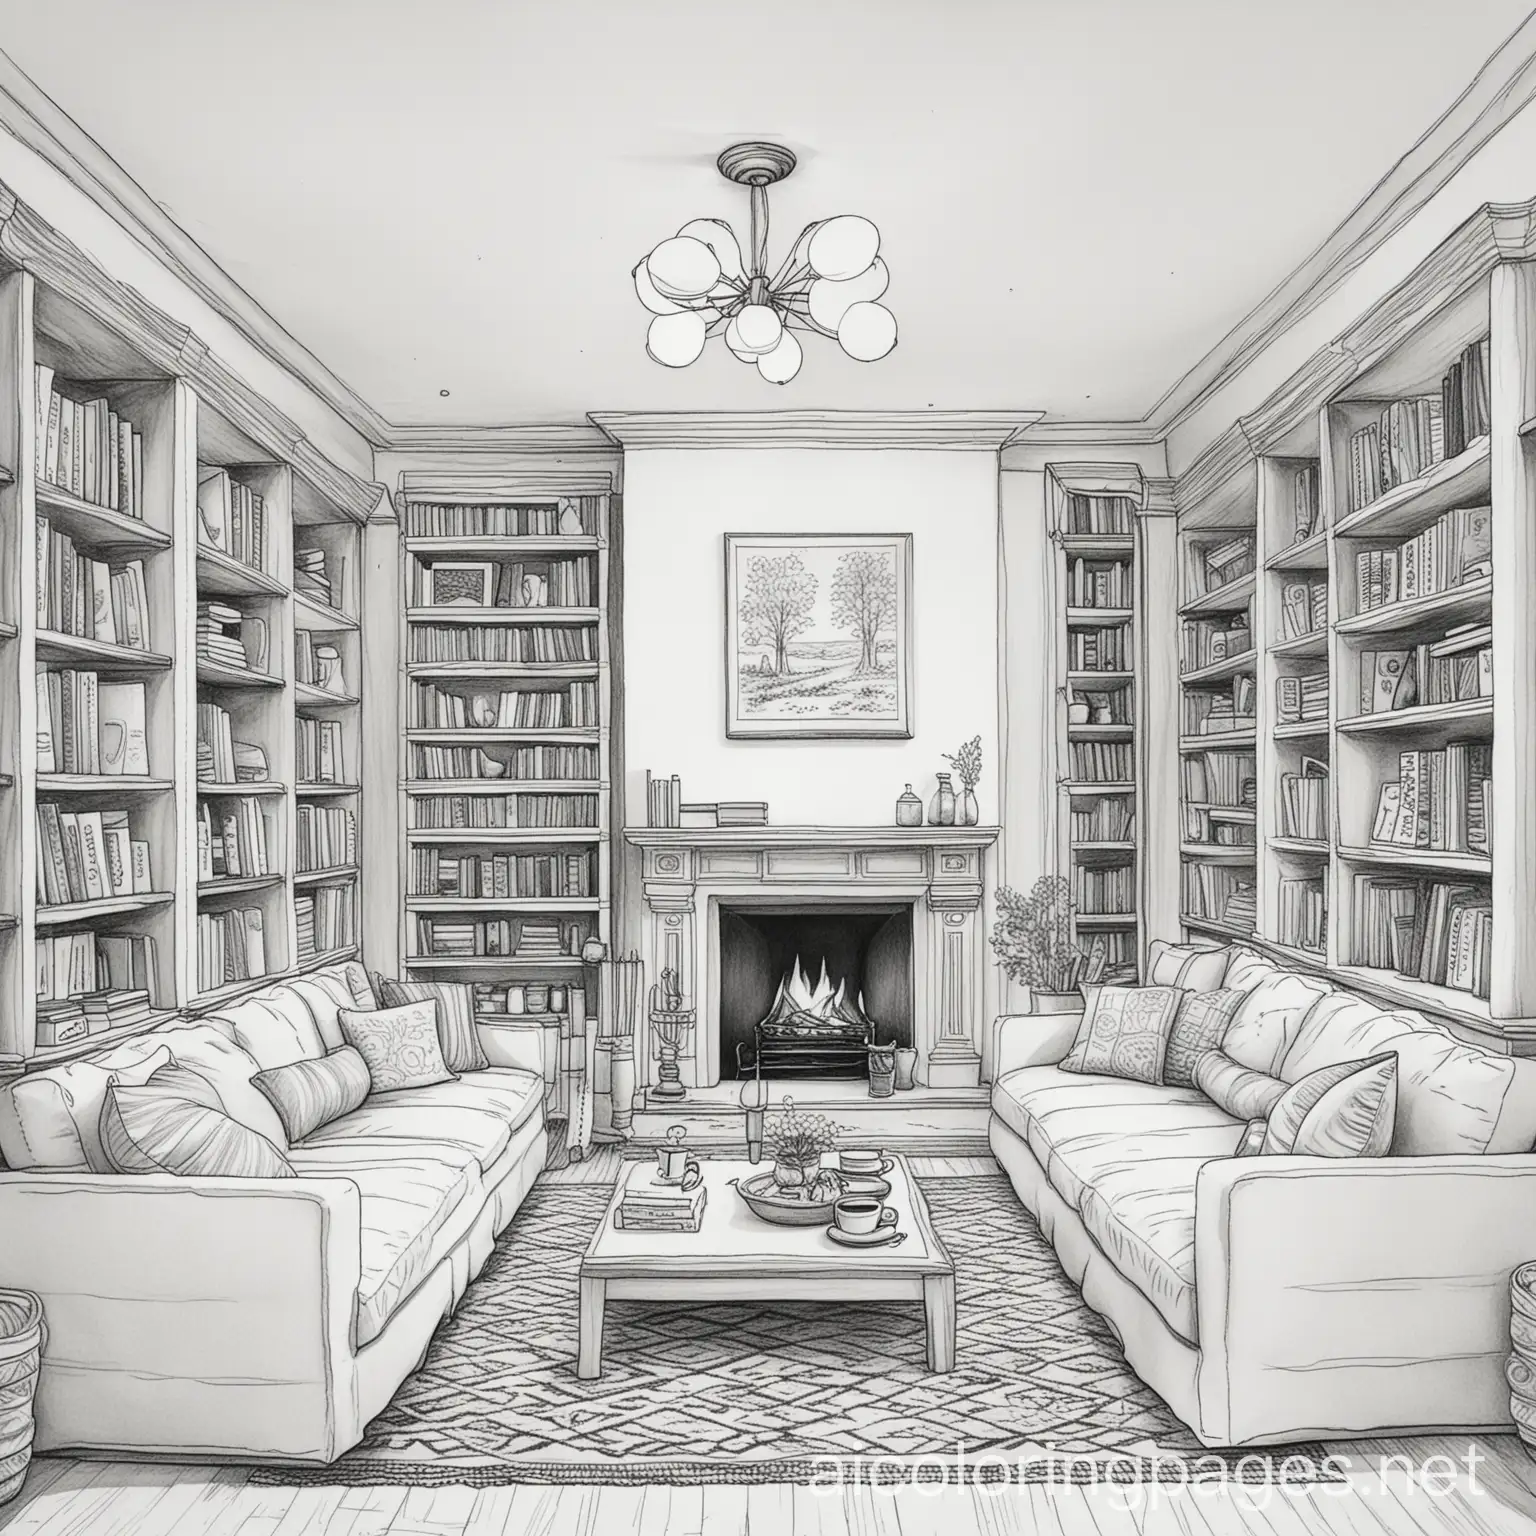 A warm, serene, cozy looking library with floor cushions and futons instead of chairs and a fireplace and coffee and food on a centrepiece



, Coloring Page, black and white, line art, white background, Simplicity, Ample White Space. The background of the coloring page is plain white to make it easy for young children to color within the lines. The outlines of all the subjects are easy to distinguish, making it simple for kids to color without too much difficulty